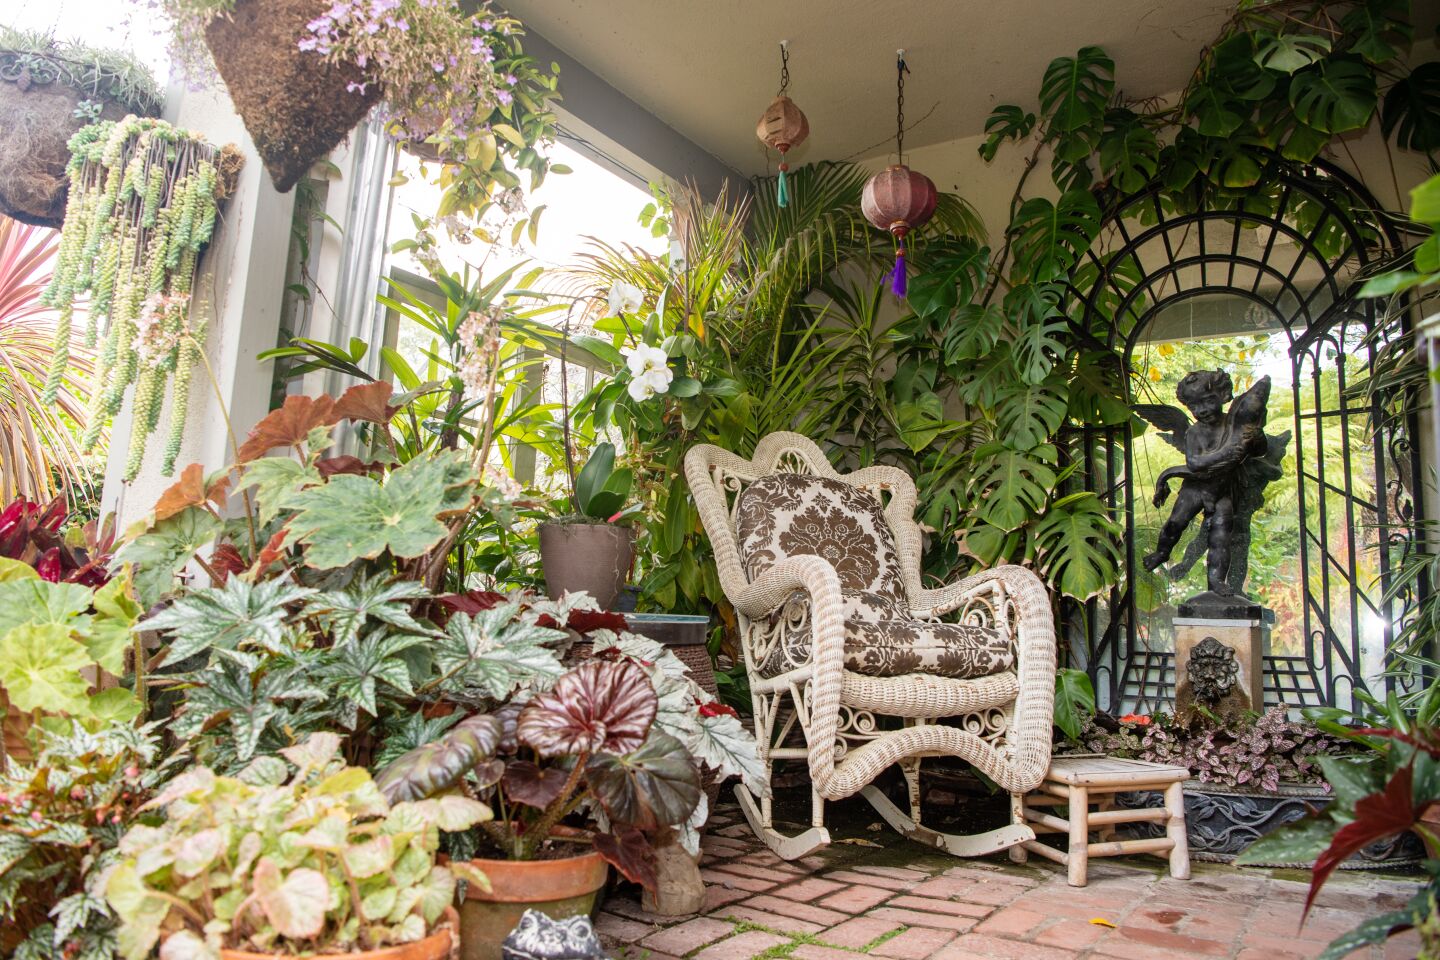 A restful, welcoming porch